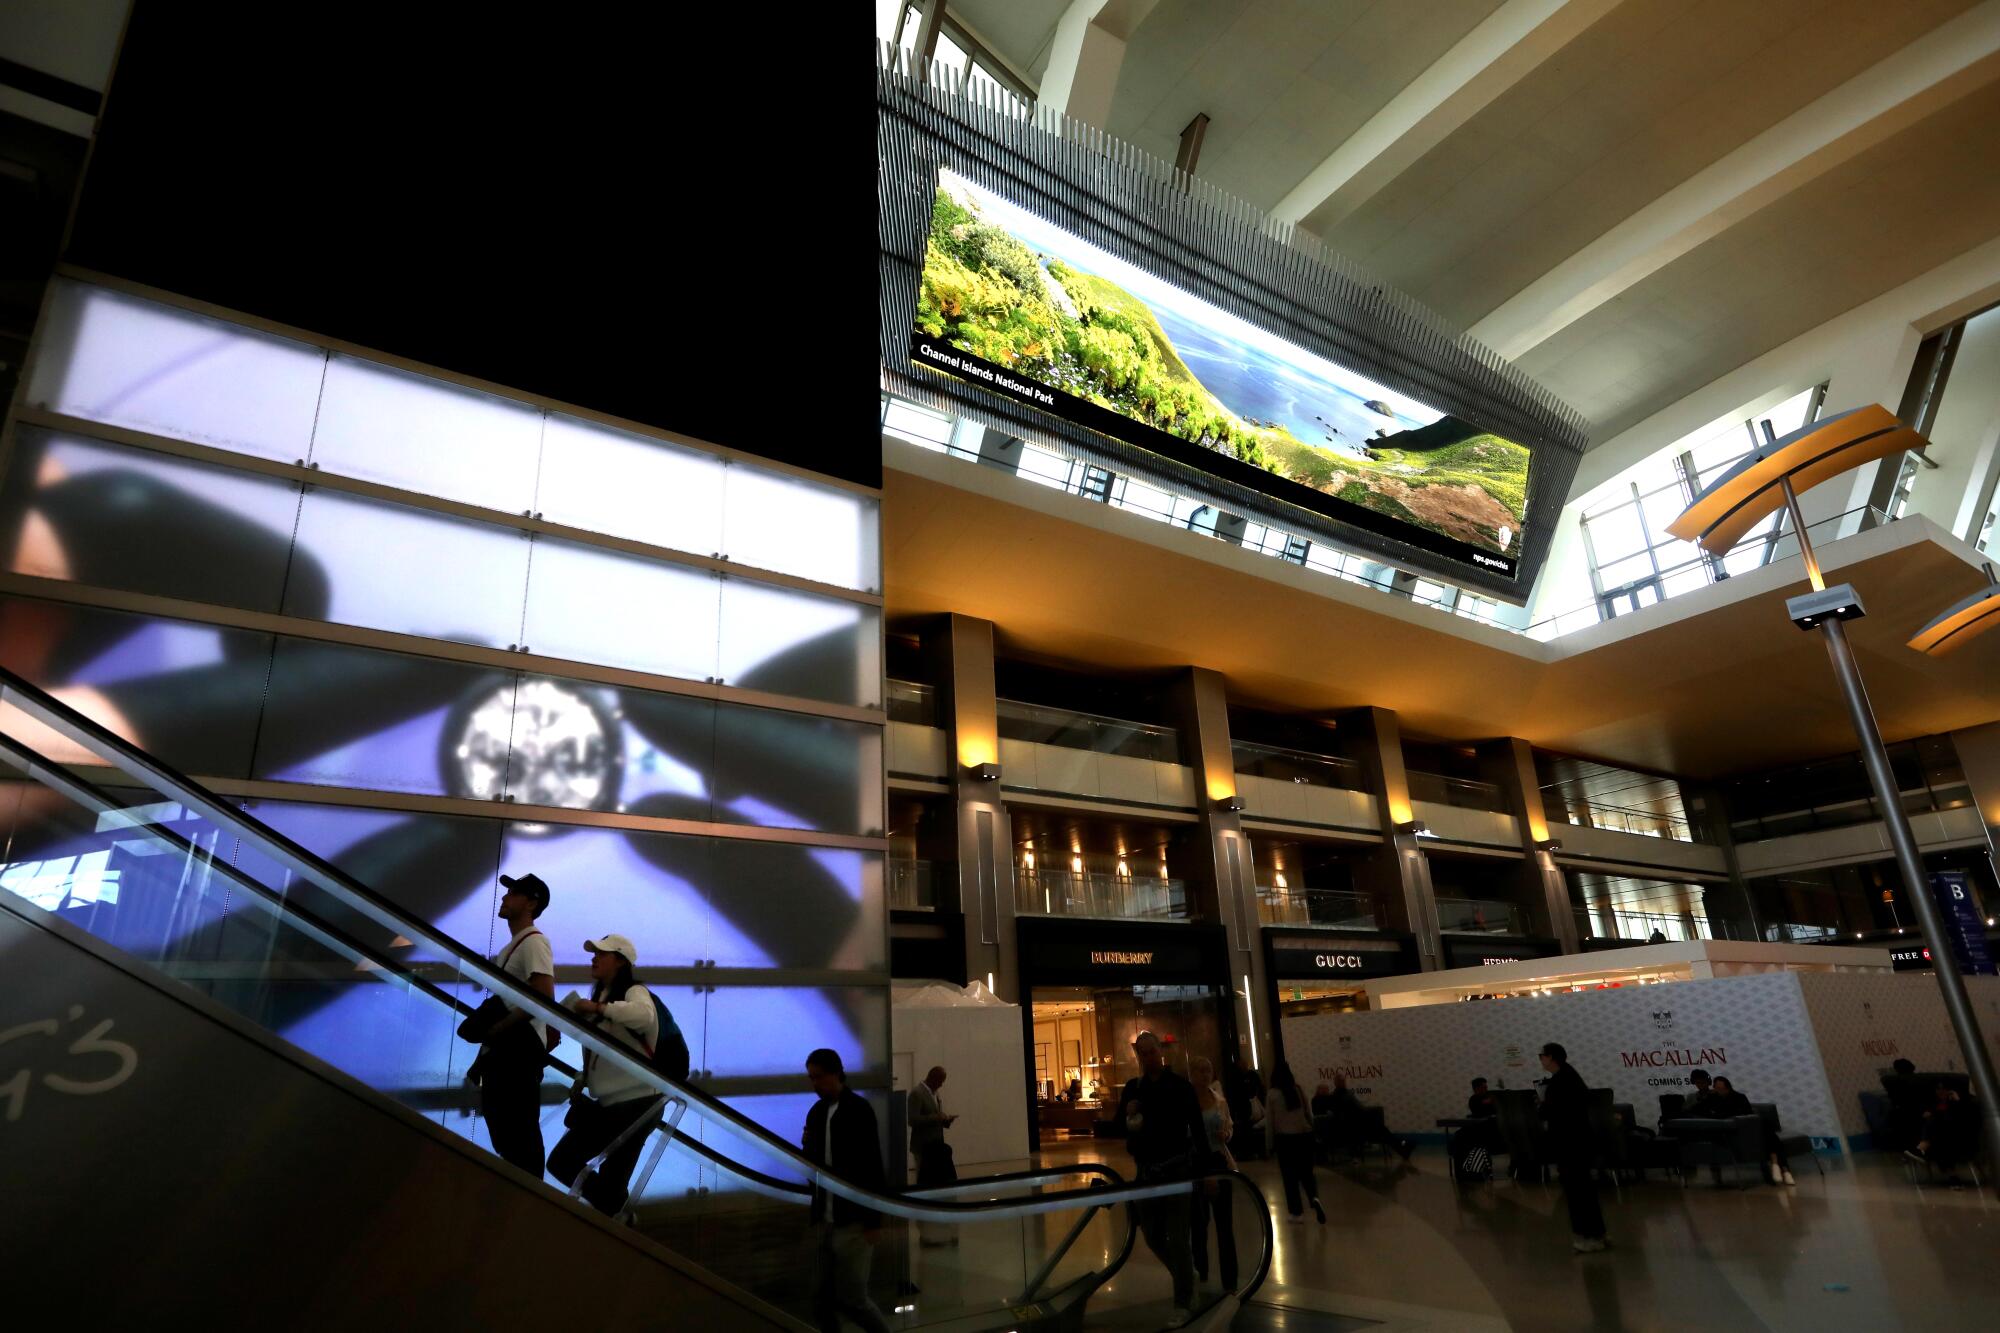 Video signage frames travelers as they make their way through the Tom Bradley International Terminal at LAX.